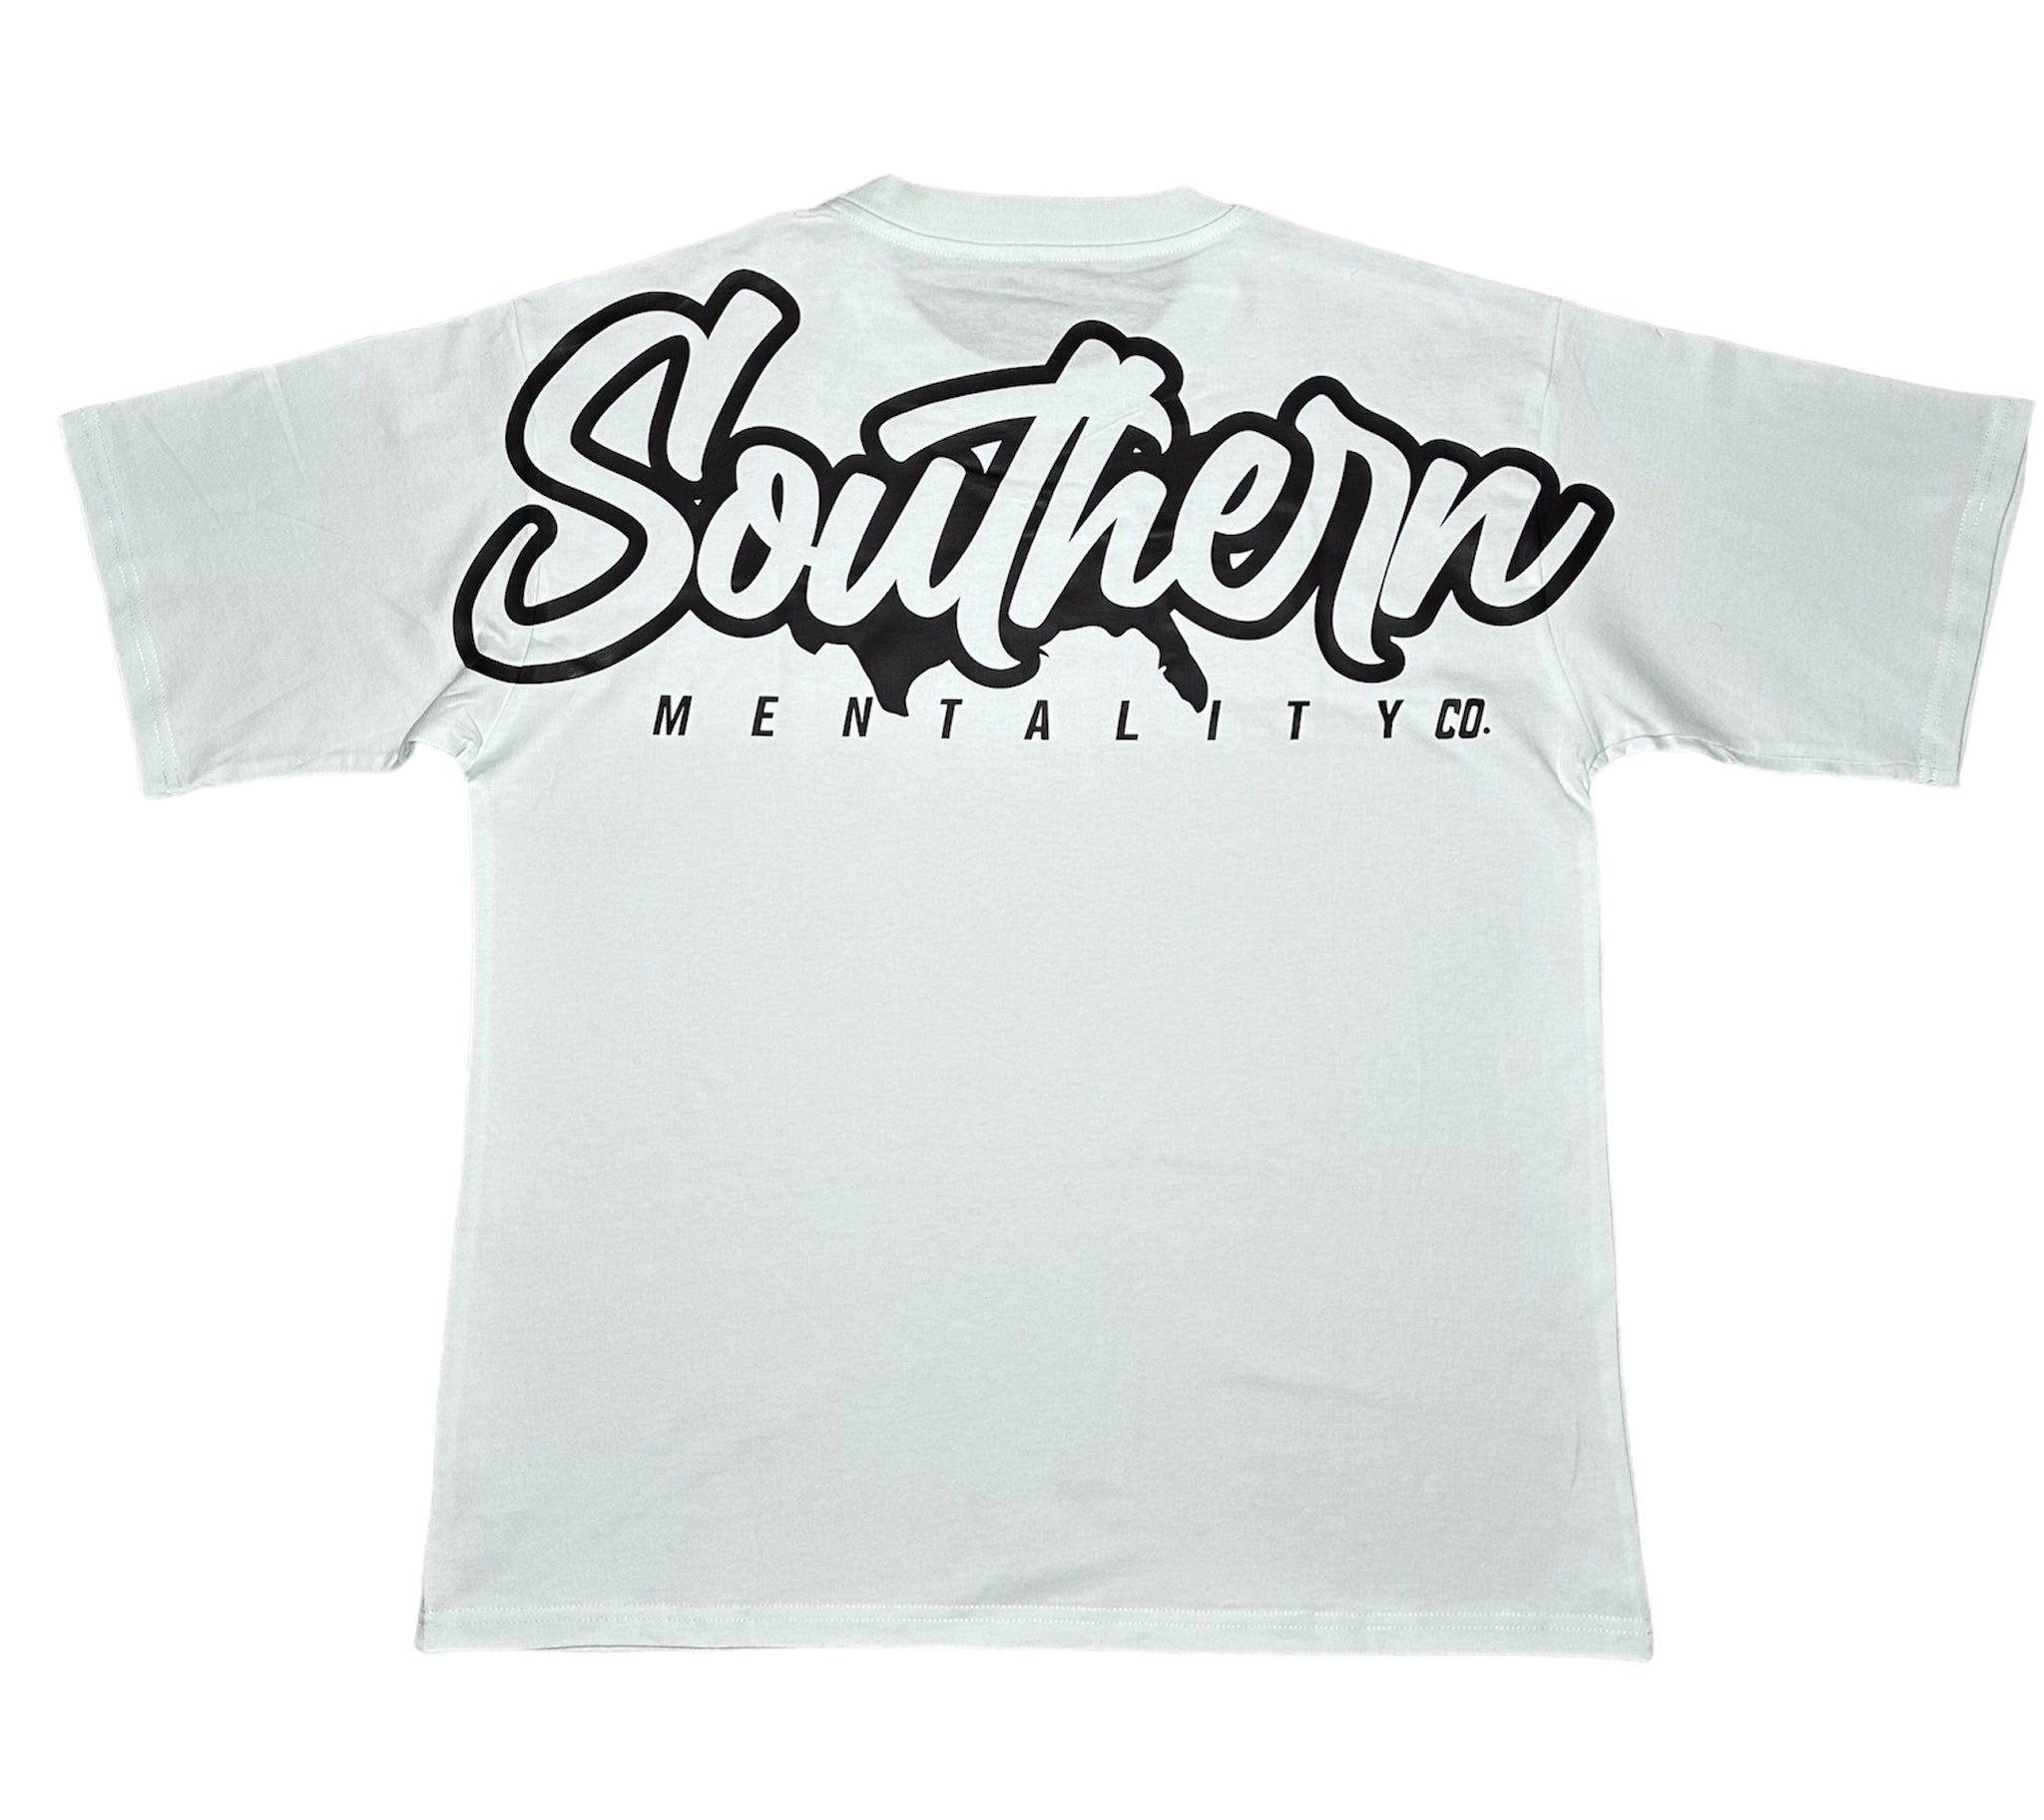 “Southern States” Oversized Tees